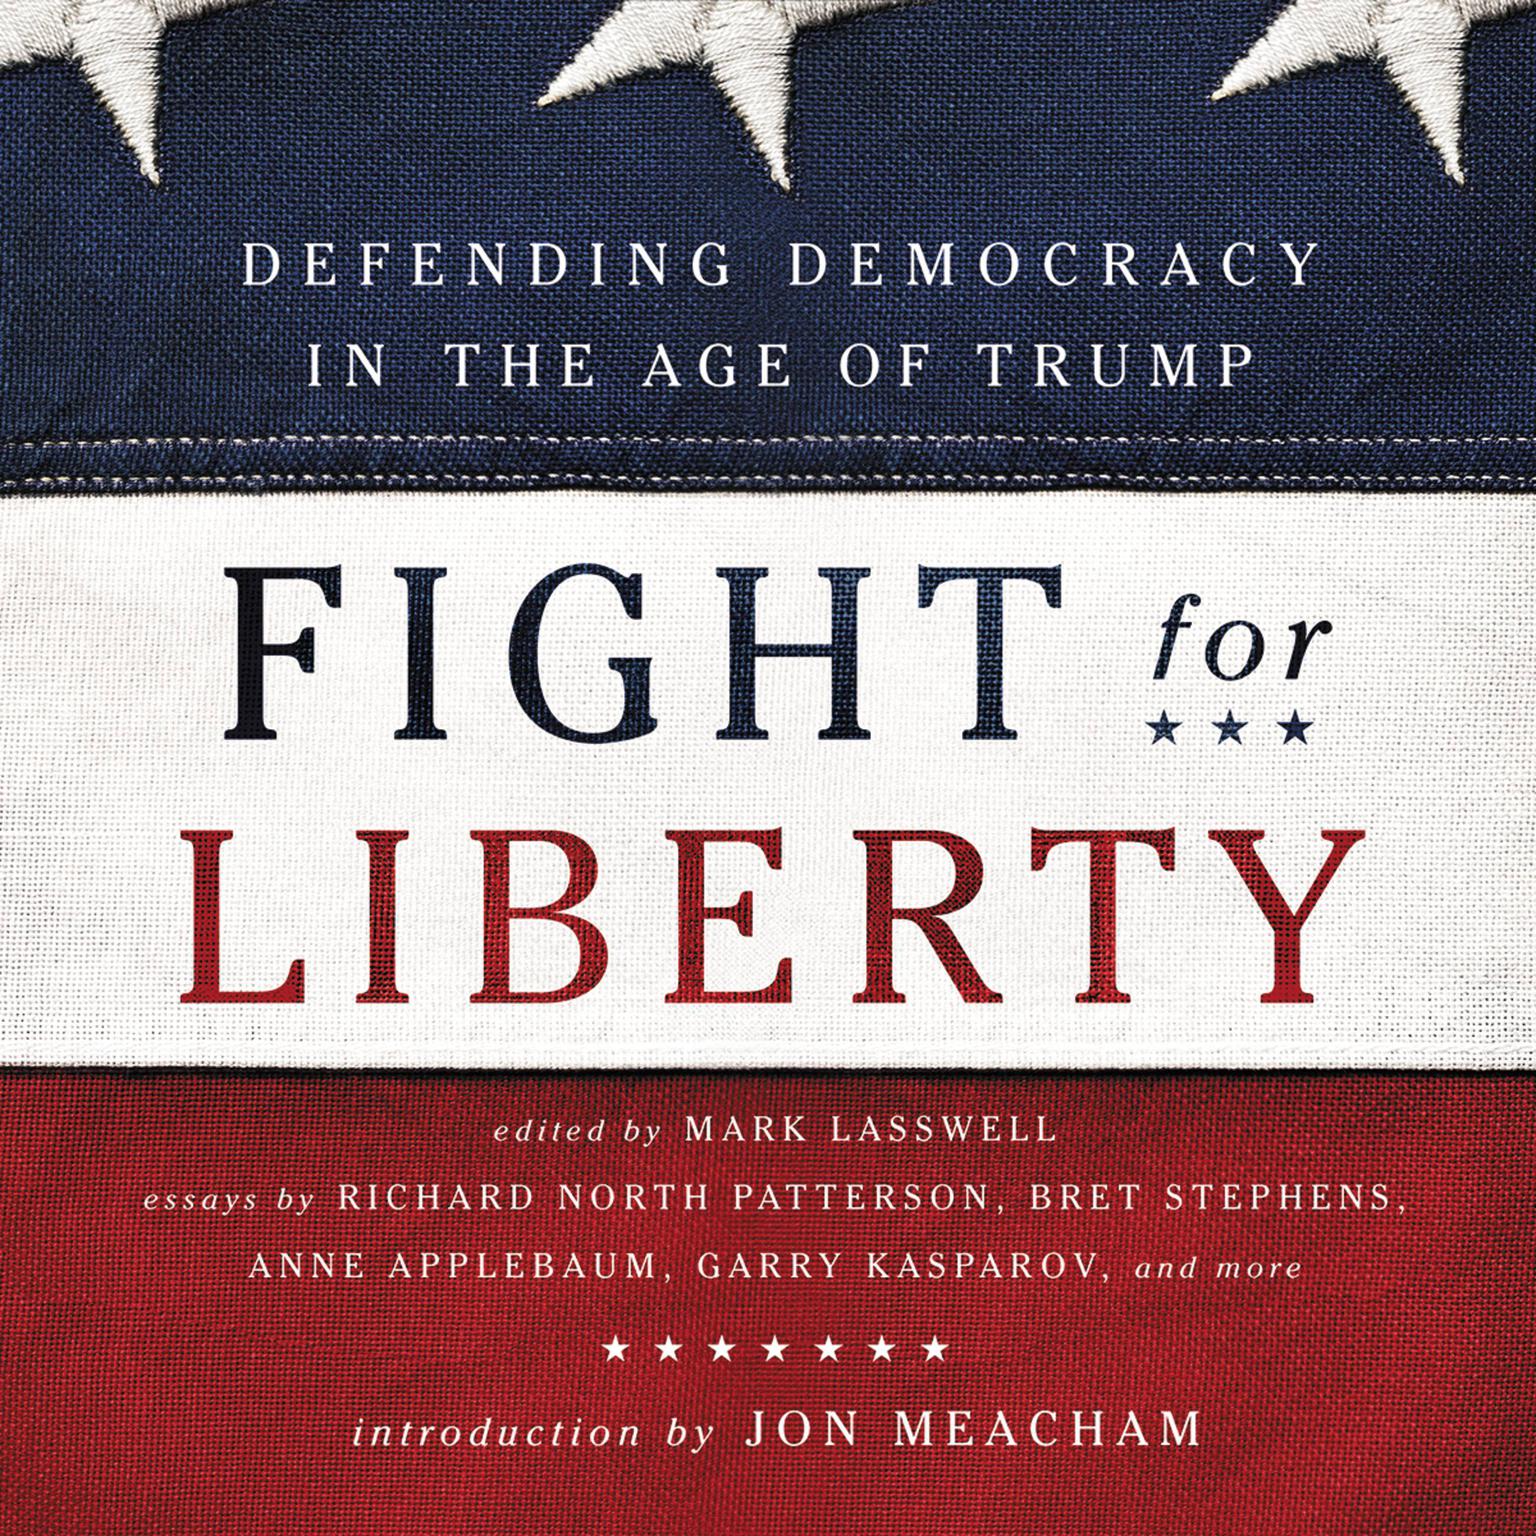 Fight for Liberty: Defending Democracy in the Age of Trump Audiobook, by Author Info Added Soon